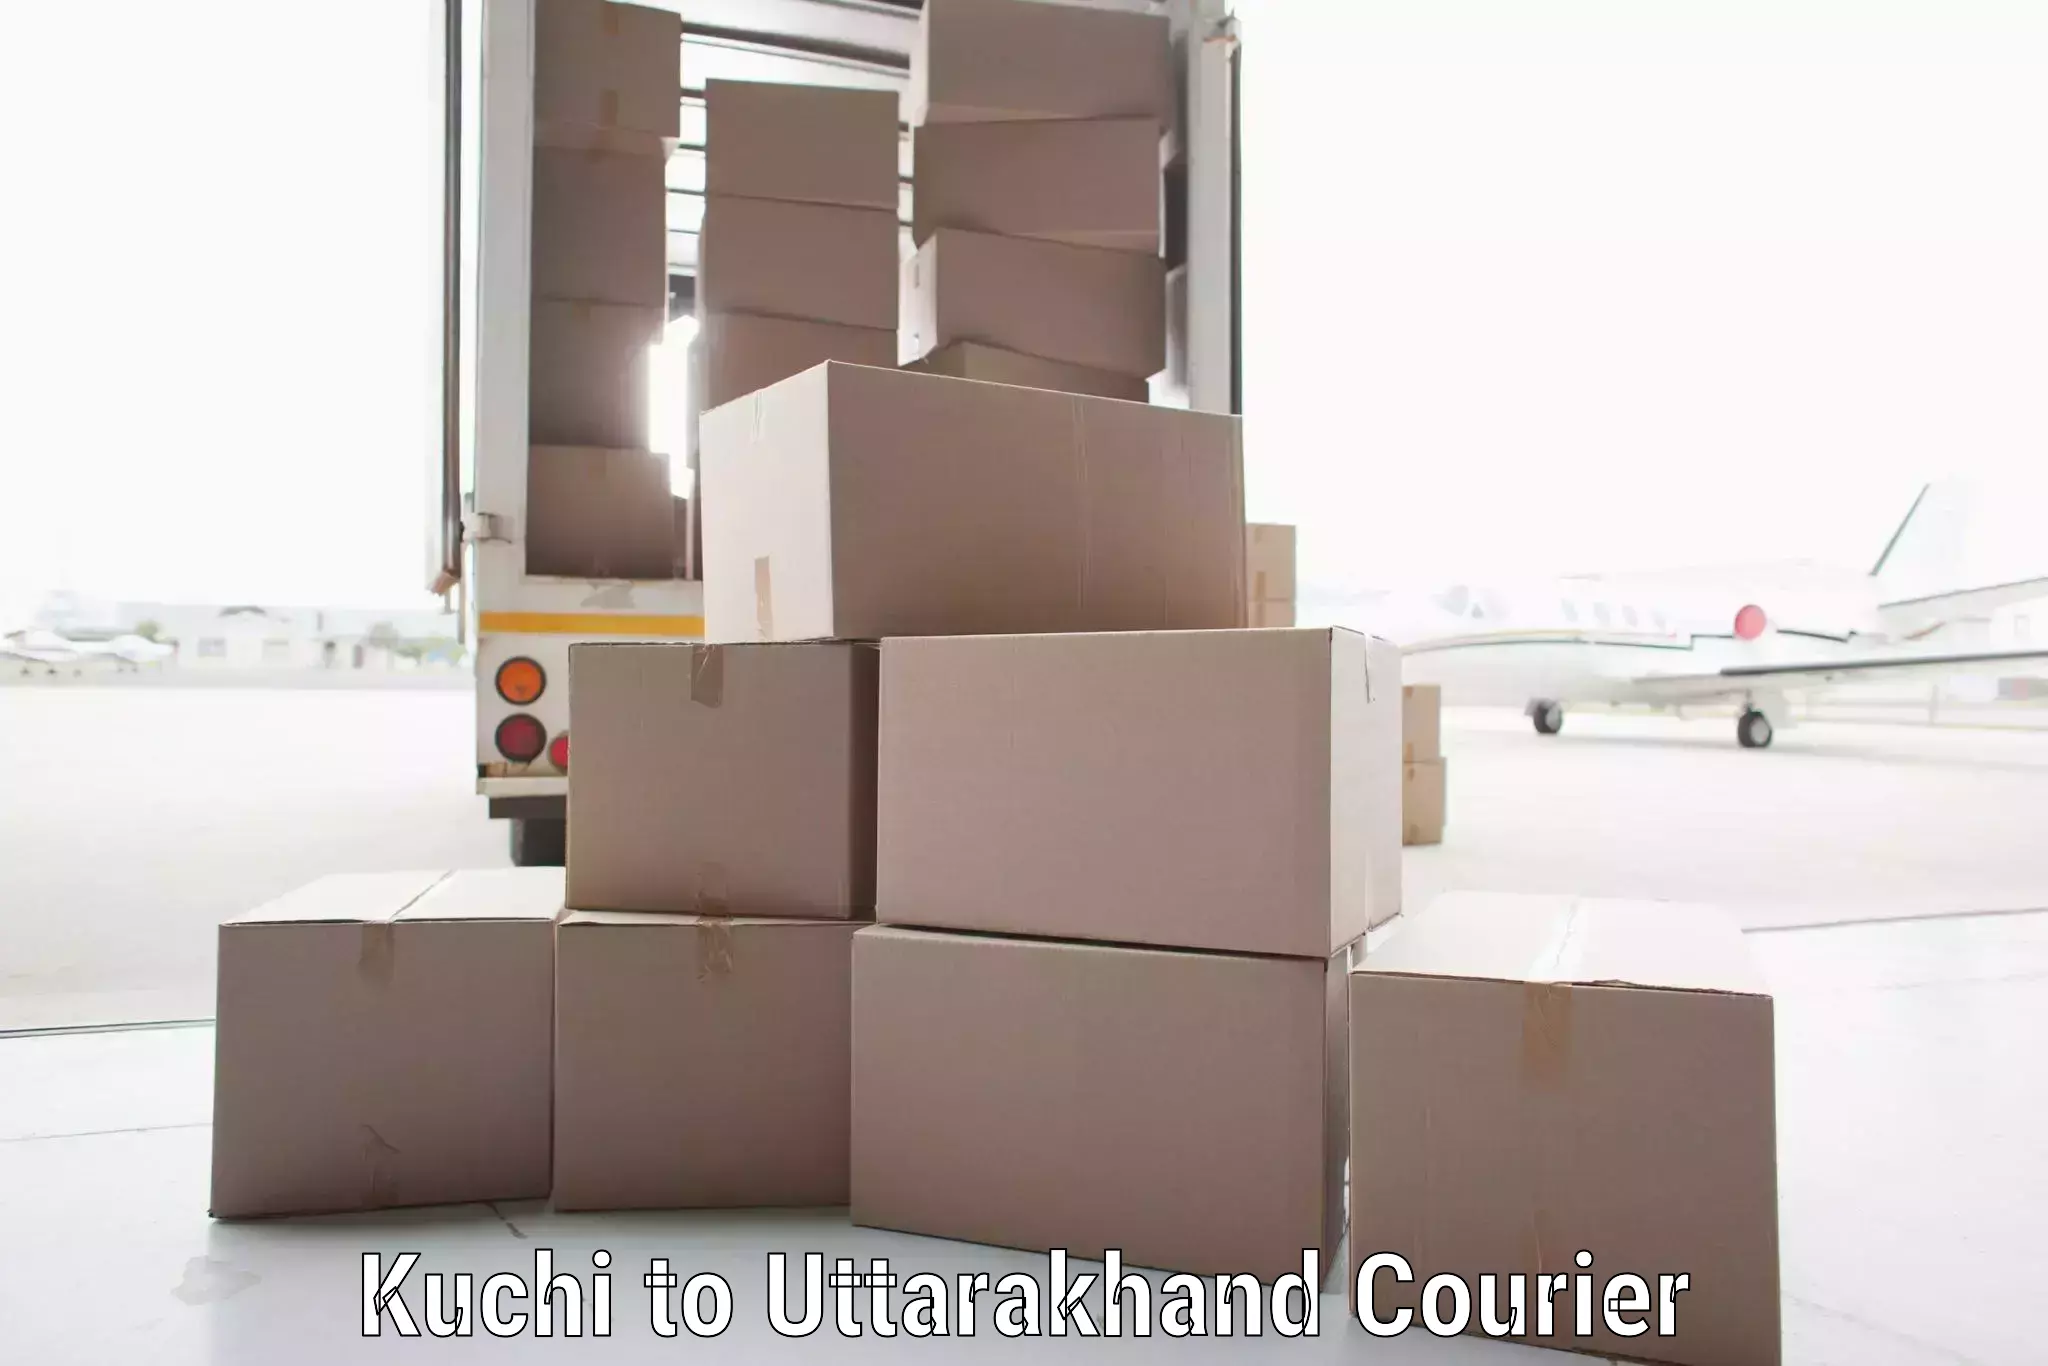 Secure package delivery Kuchi to Rudrapur